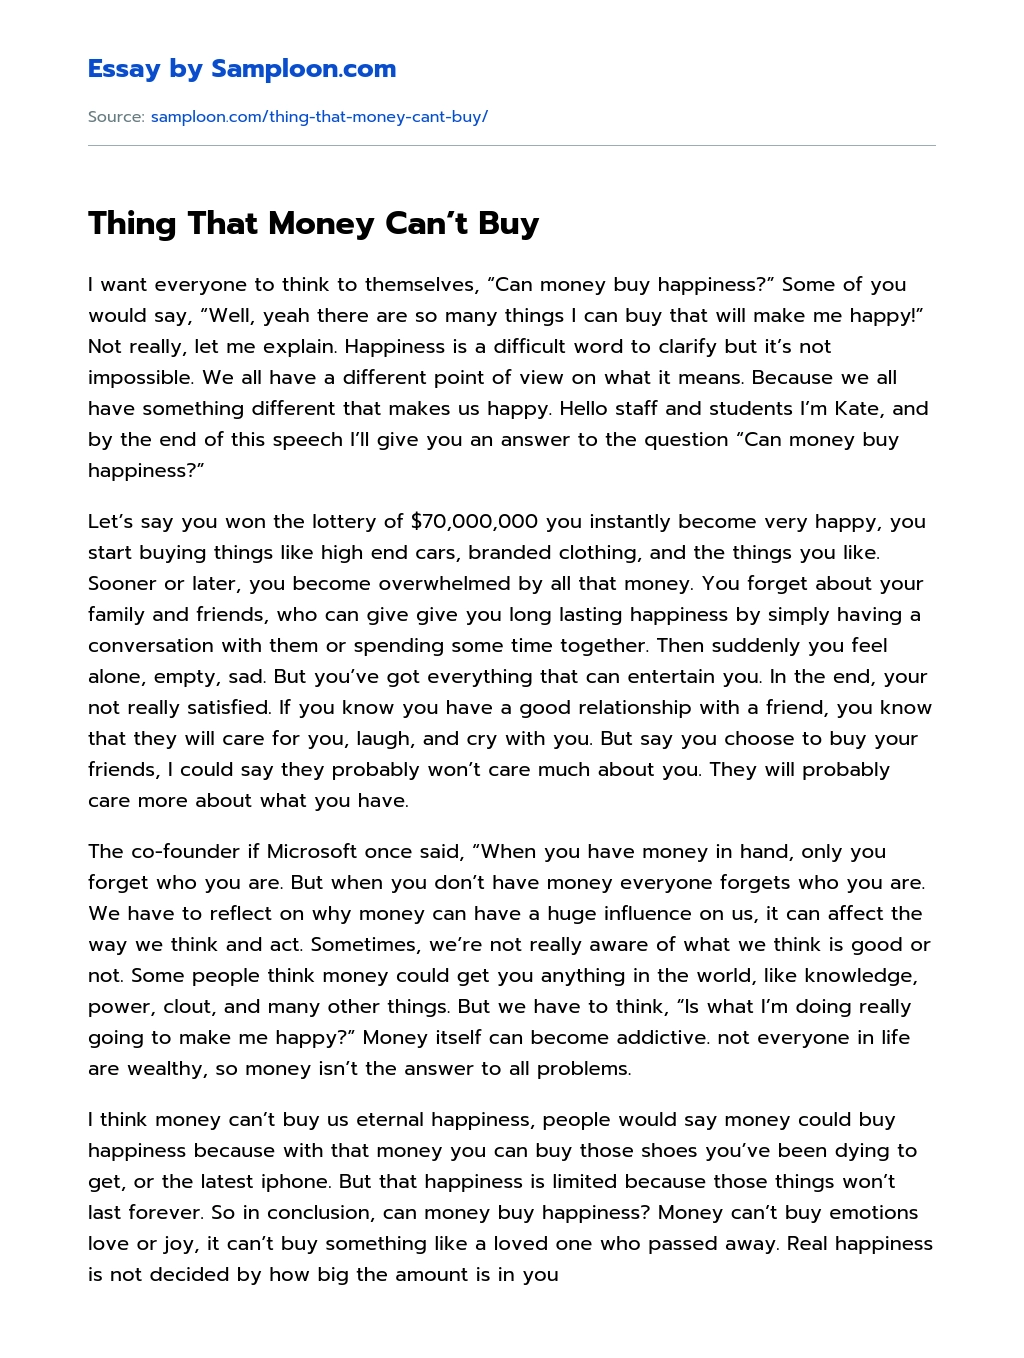 Thing That Money Can T Buy Free Essay Sample On Samploon Com